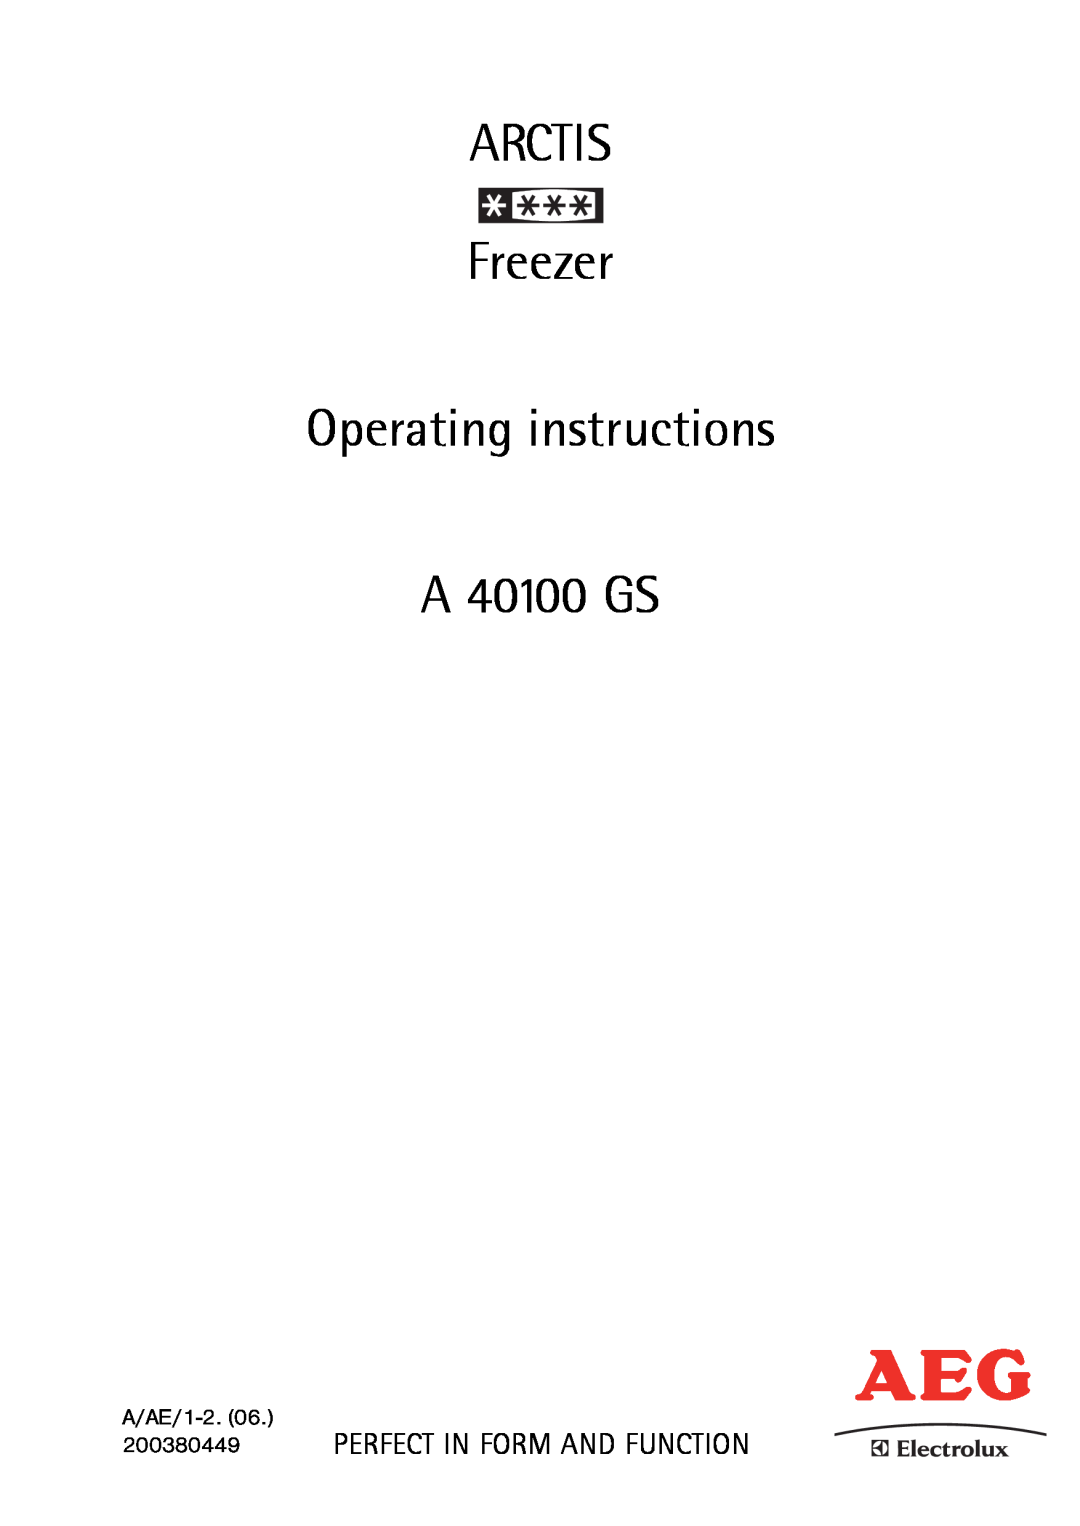 Electrolux operating instructions ARCTIS Freezer Operating instructions A 40100 GS 